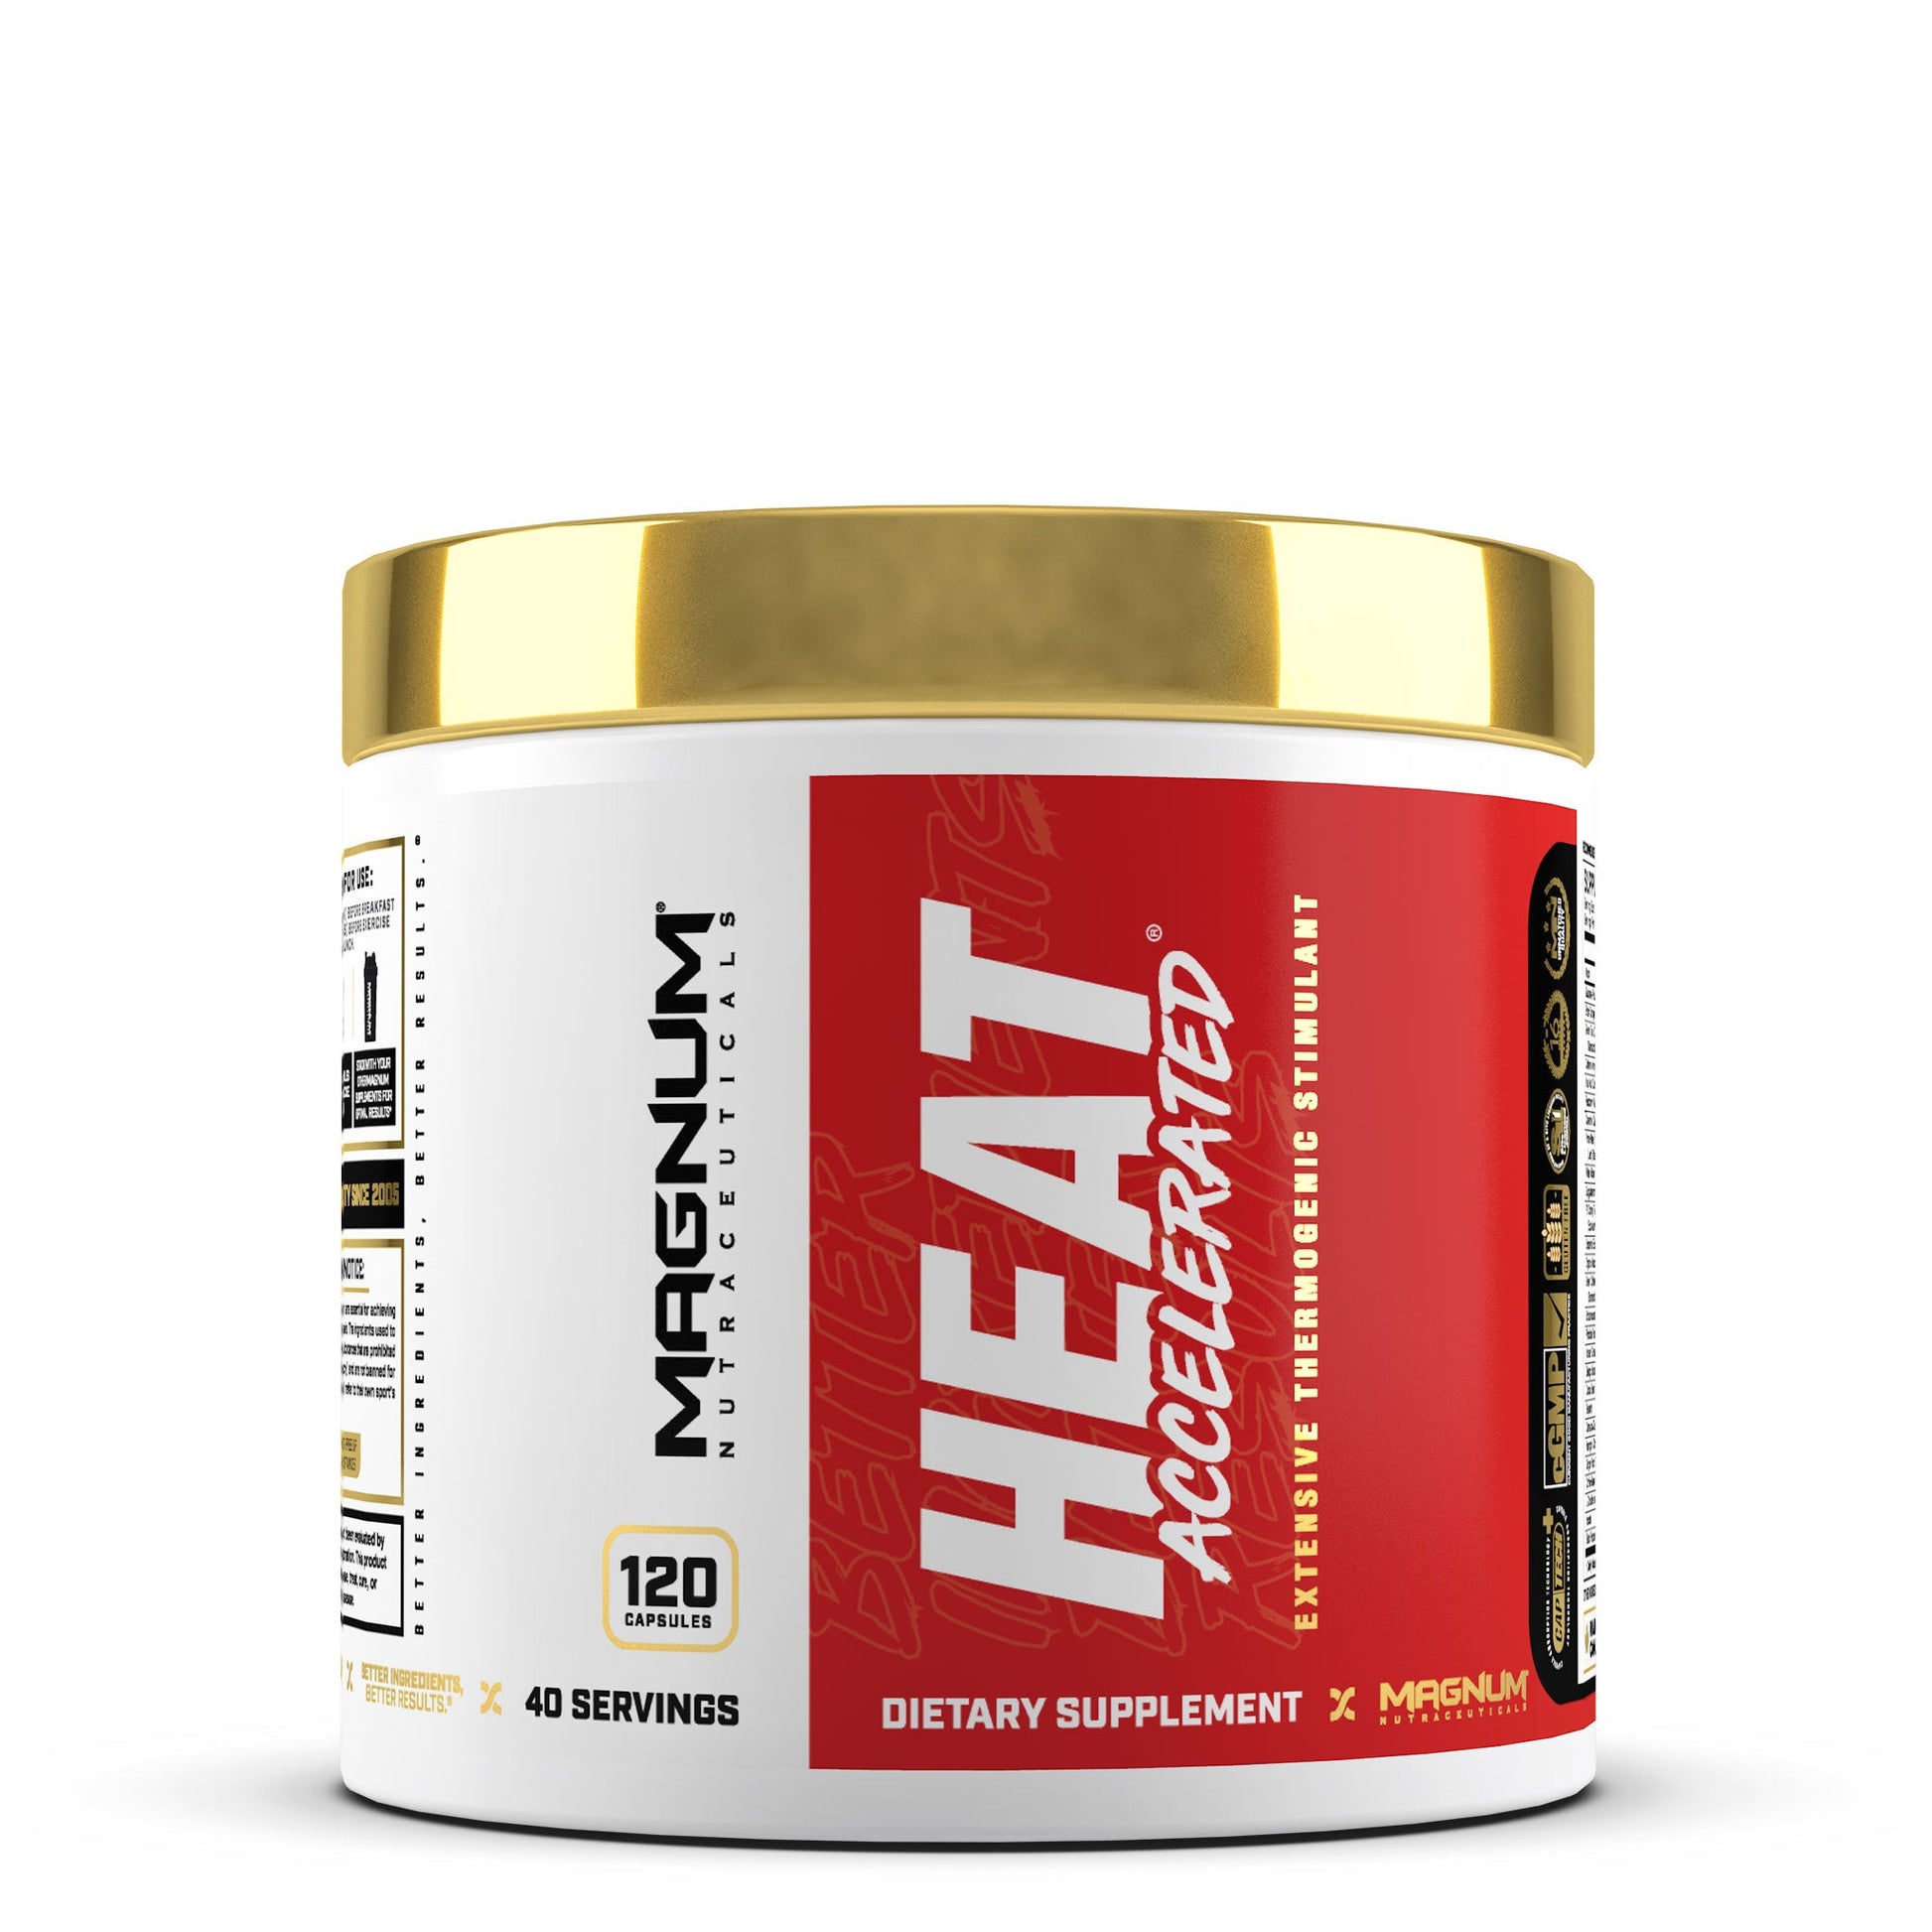 Front view, Heat Accelerated, Extensive Thermogenic Stimulant, 120 capsules, 40 servings